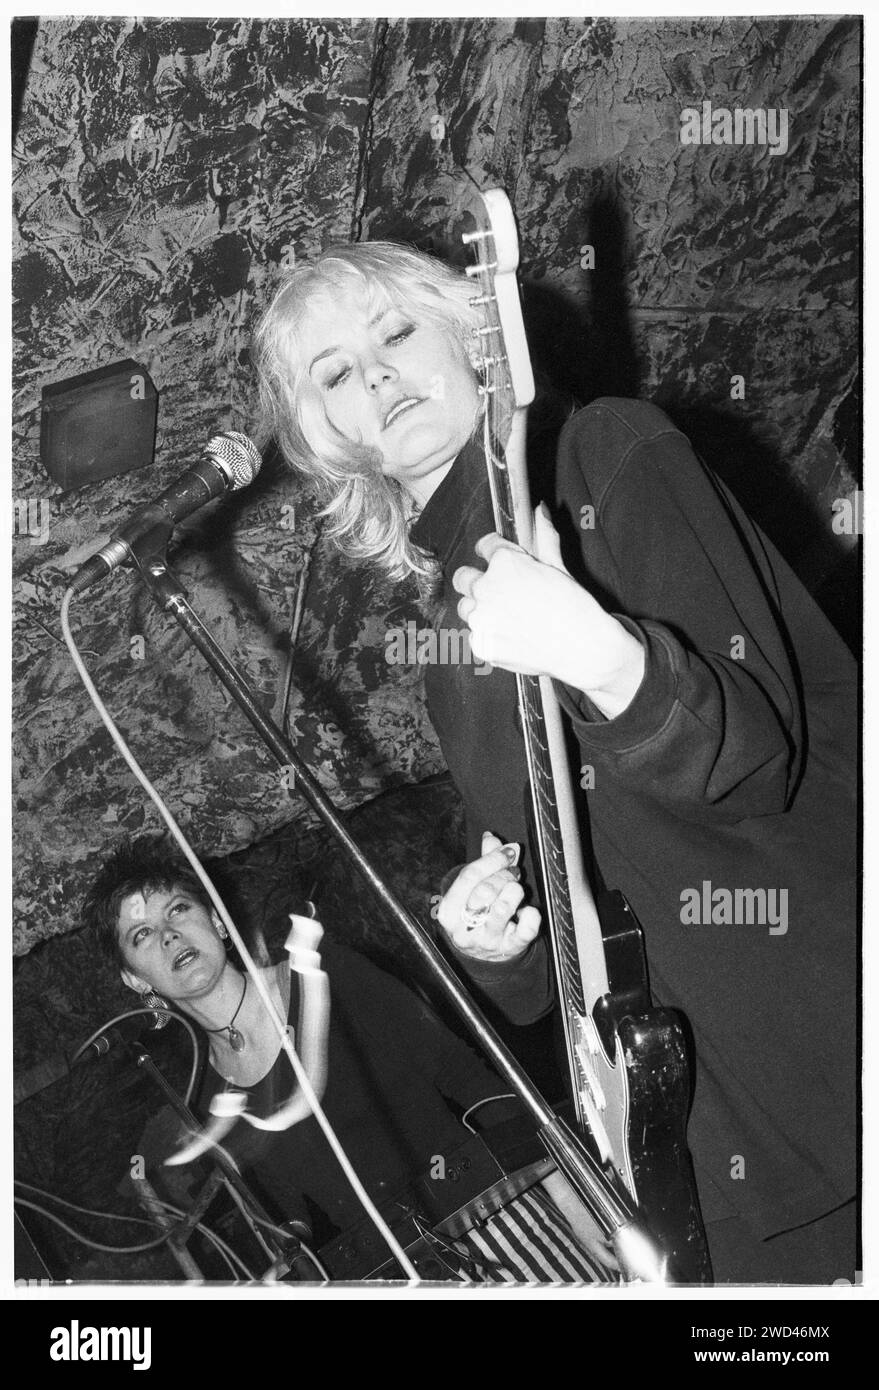 CATATONIA, CONCERT, 1994: A very young Cerys Matthews  of Catatonia playing live at the Legendary TJ’s in Newport, Wales, UK on 9 April 1994. Photo: Rob Watkins. INFO: Catatonia, a Welsh alternative rock band in the '90s, fronted by Cerys Matthews, gained fame with hits like 'Mulder and Scully' and 'Road Rage.' Their eclectic sound, blending pop, rock, and folk, solidified their place in the Britpop era, showcasing Matthews' distinctive vocals. Stock Photo